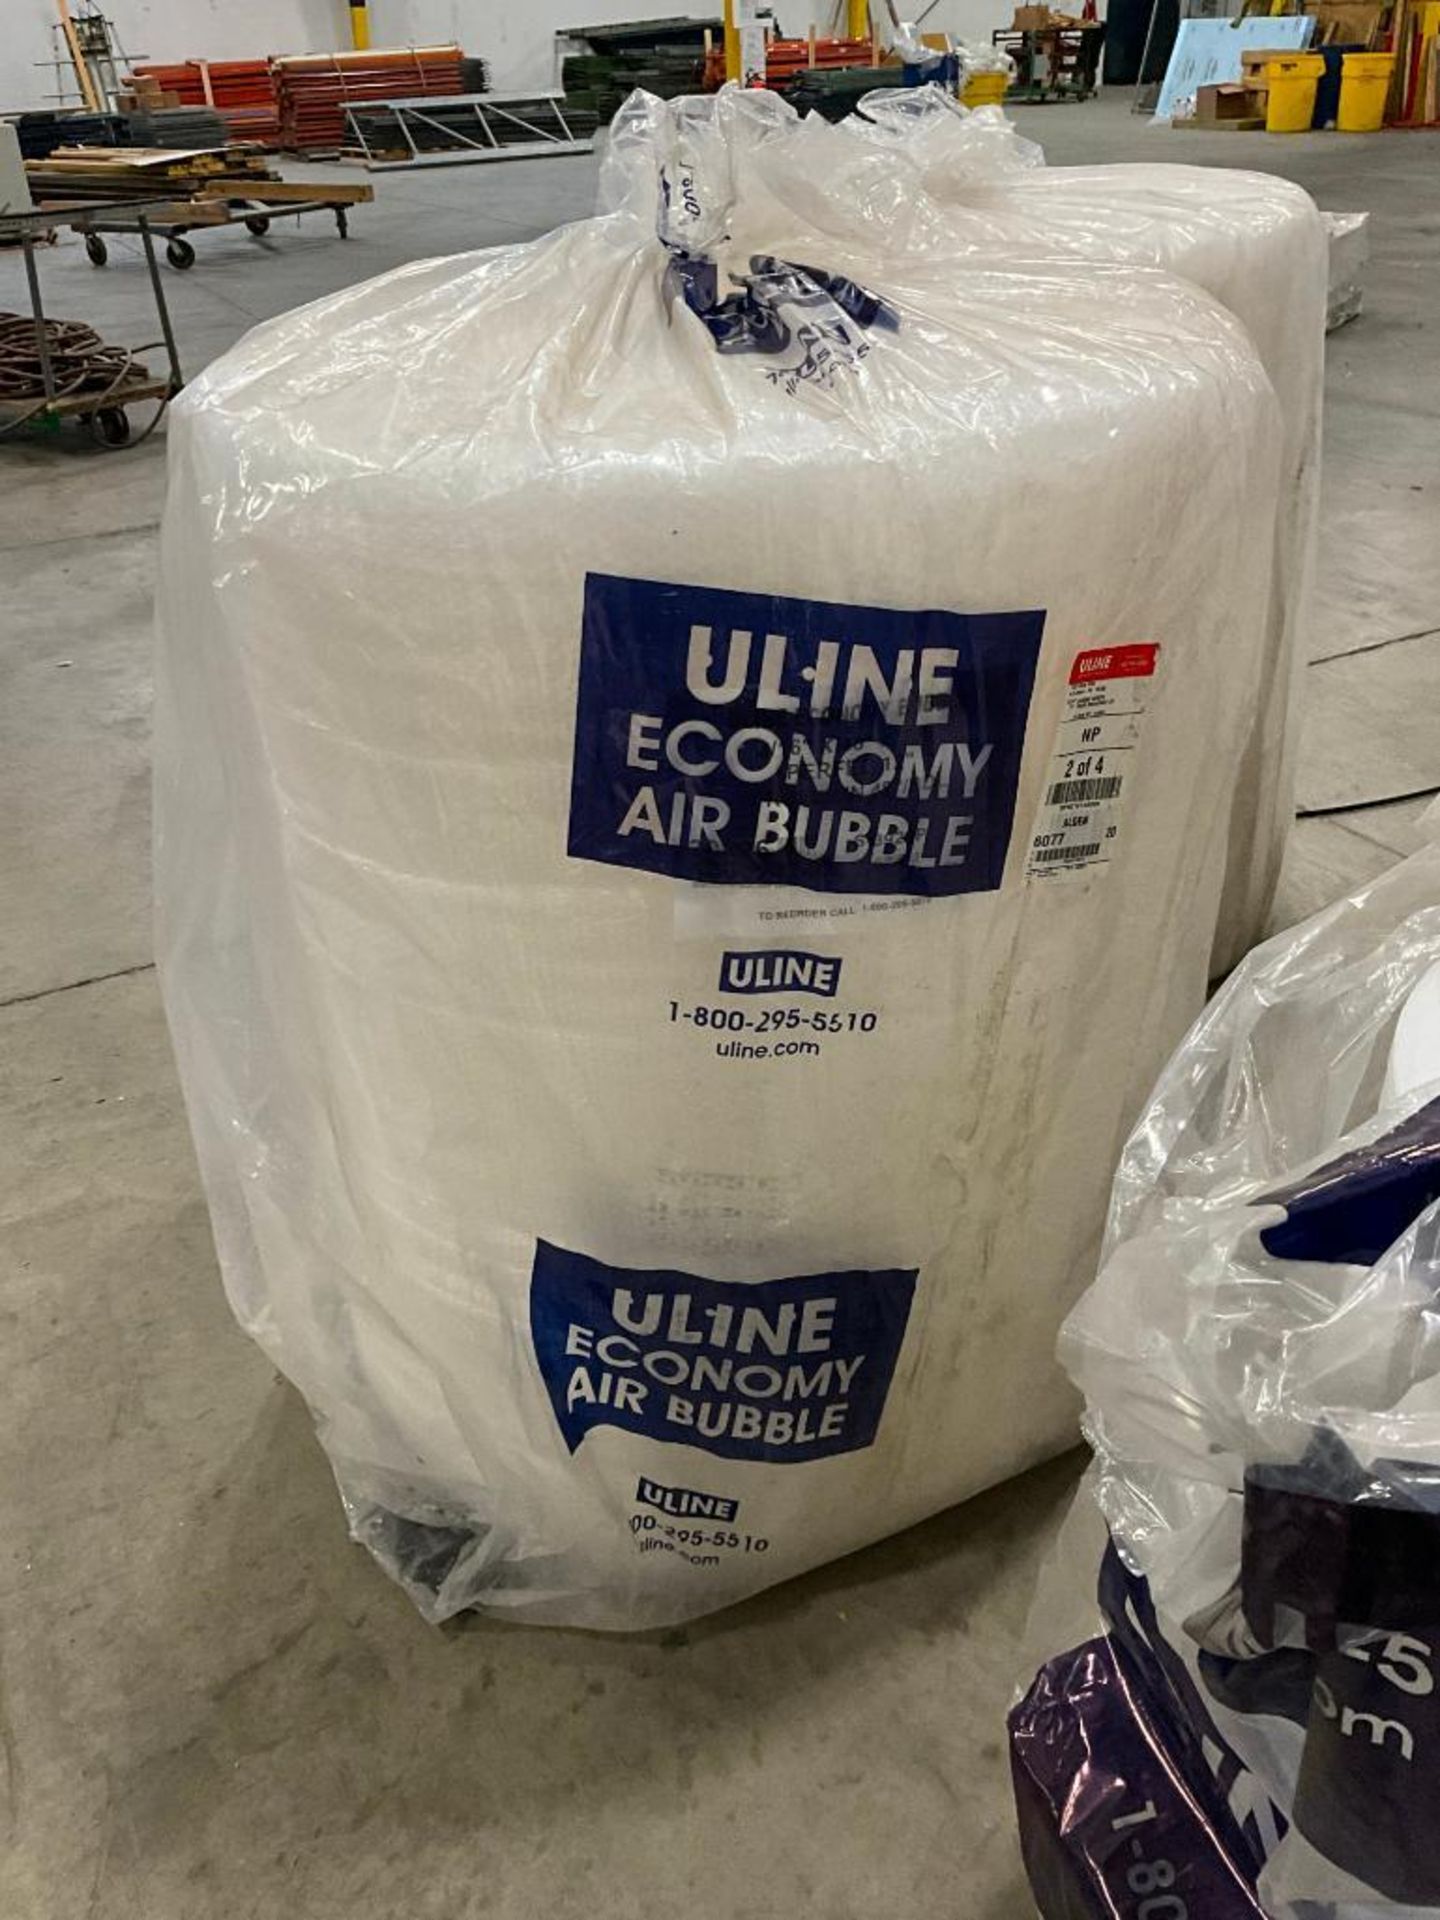 Uline Economy Air Bubble Wrap, 3/16" x 48" x 750', Perfed 12", (2) Rolls in 48" BDL, 1/2 Roll Uline - Image 7 of 16